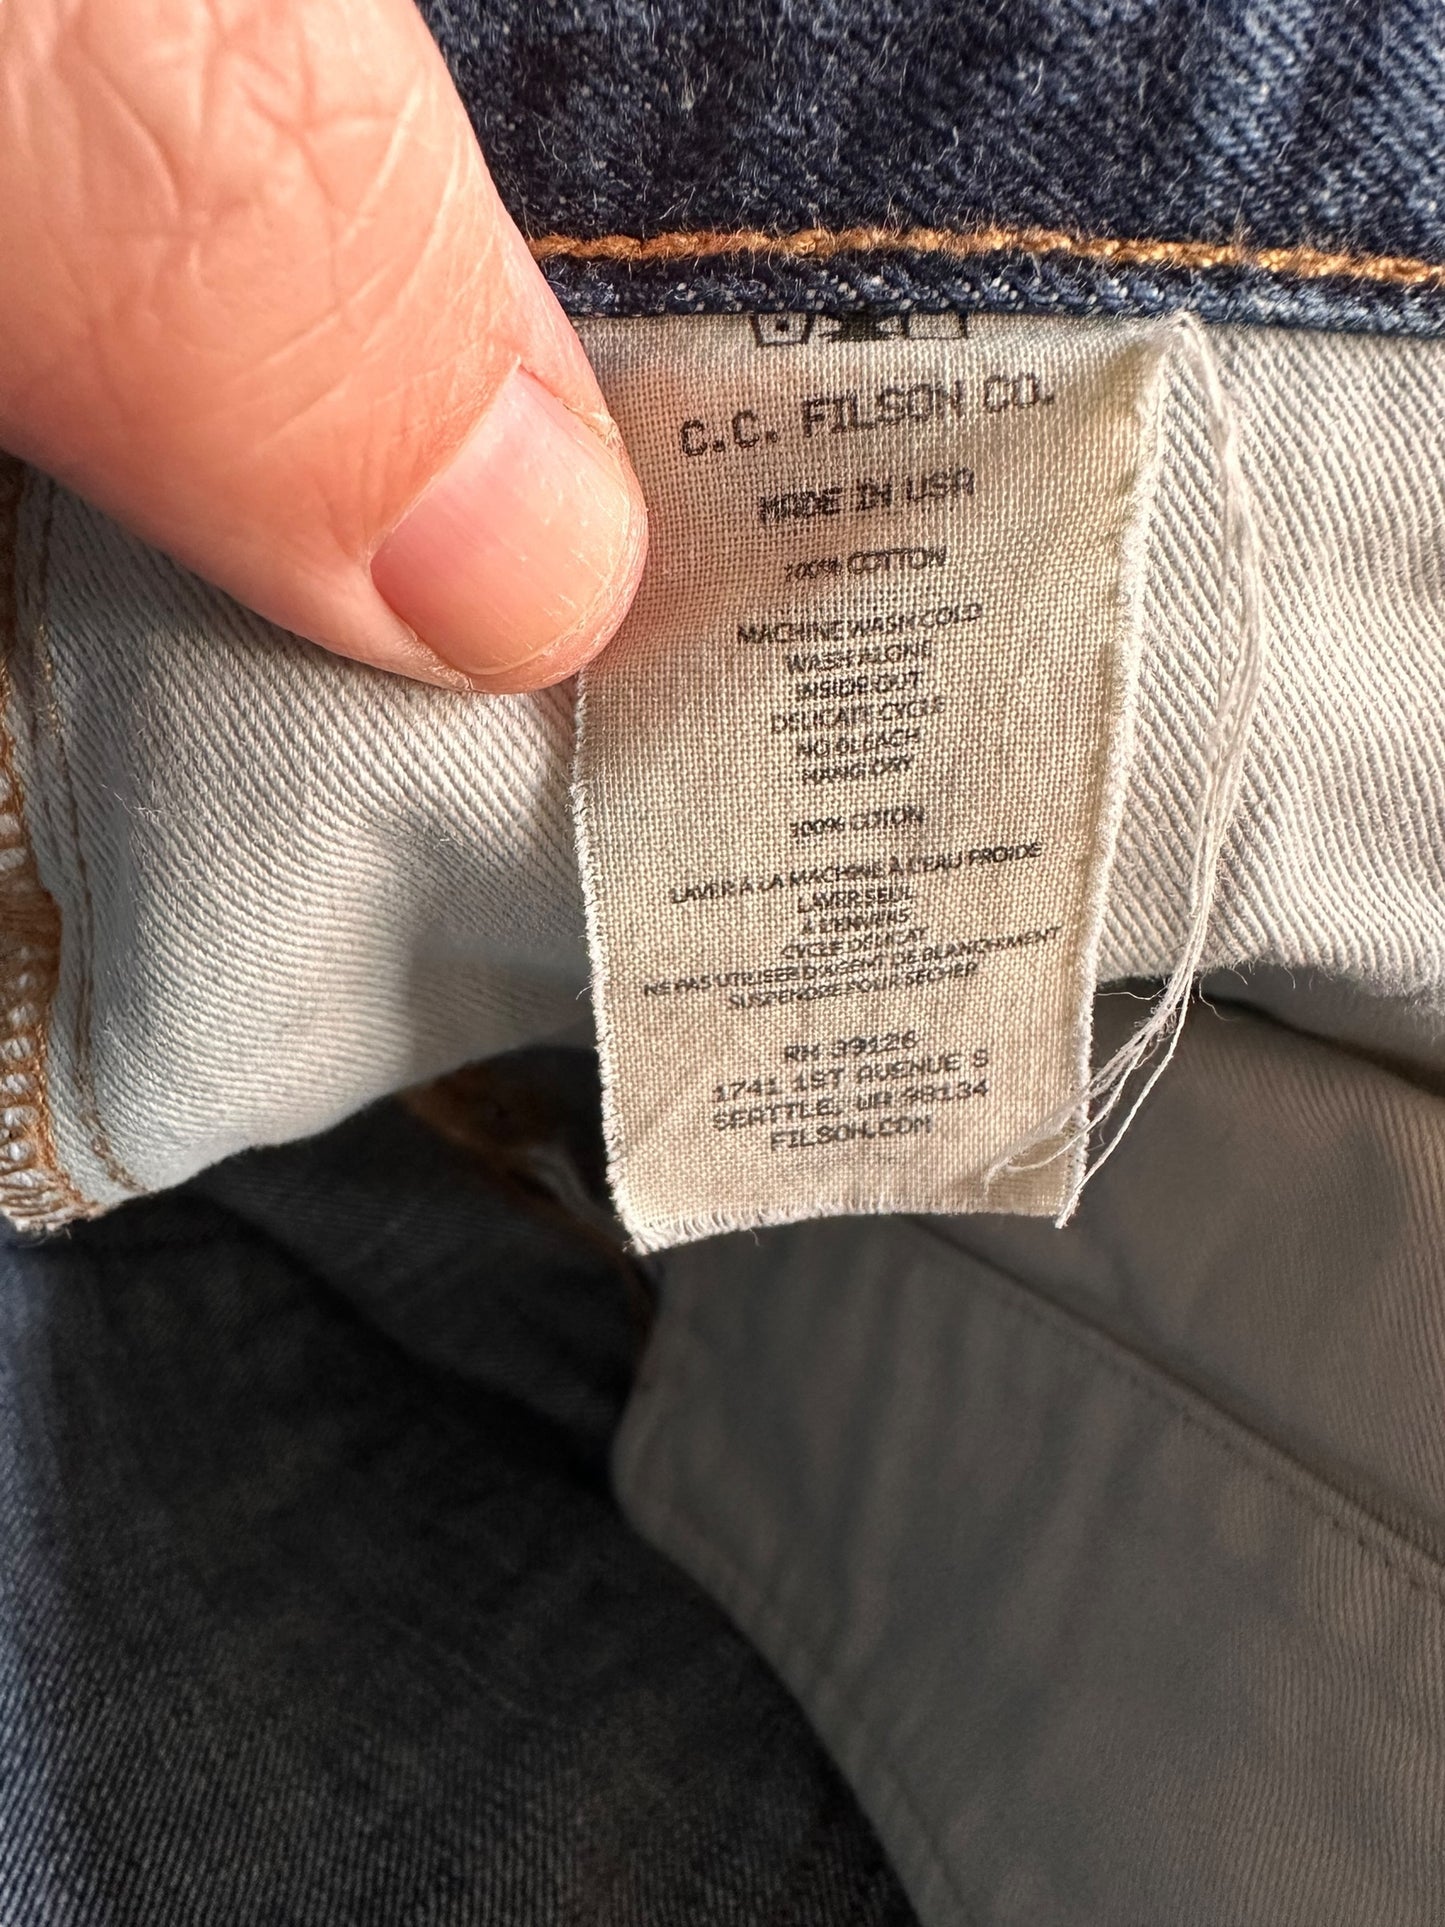 Production Tag View of Filson Selvedge Dungarees W31 |  Filson Jeans | Filson Denim Workwear Seattle